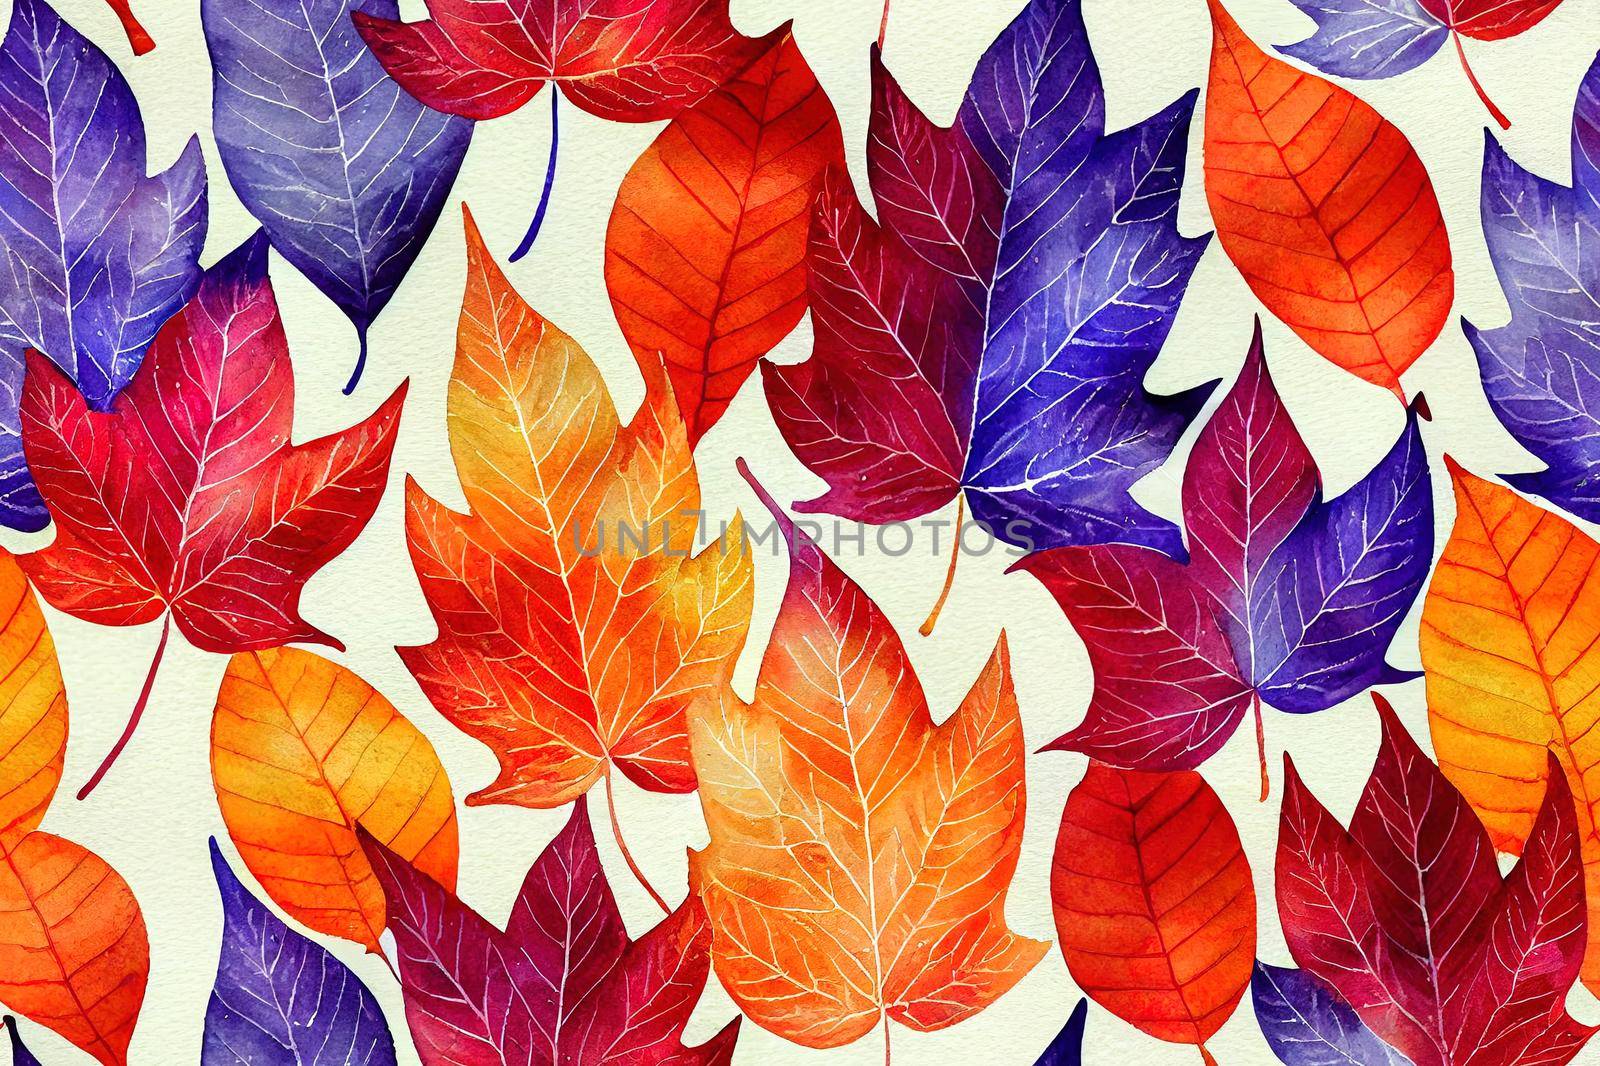 Seamless pattern with hand drawn watercolor fall leaves for fabric, poster, card, wallpaper, wrapping paper, and home decor. High quality illustration